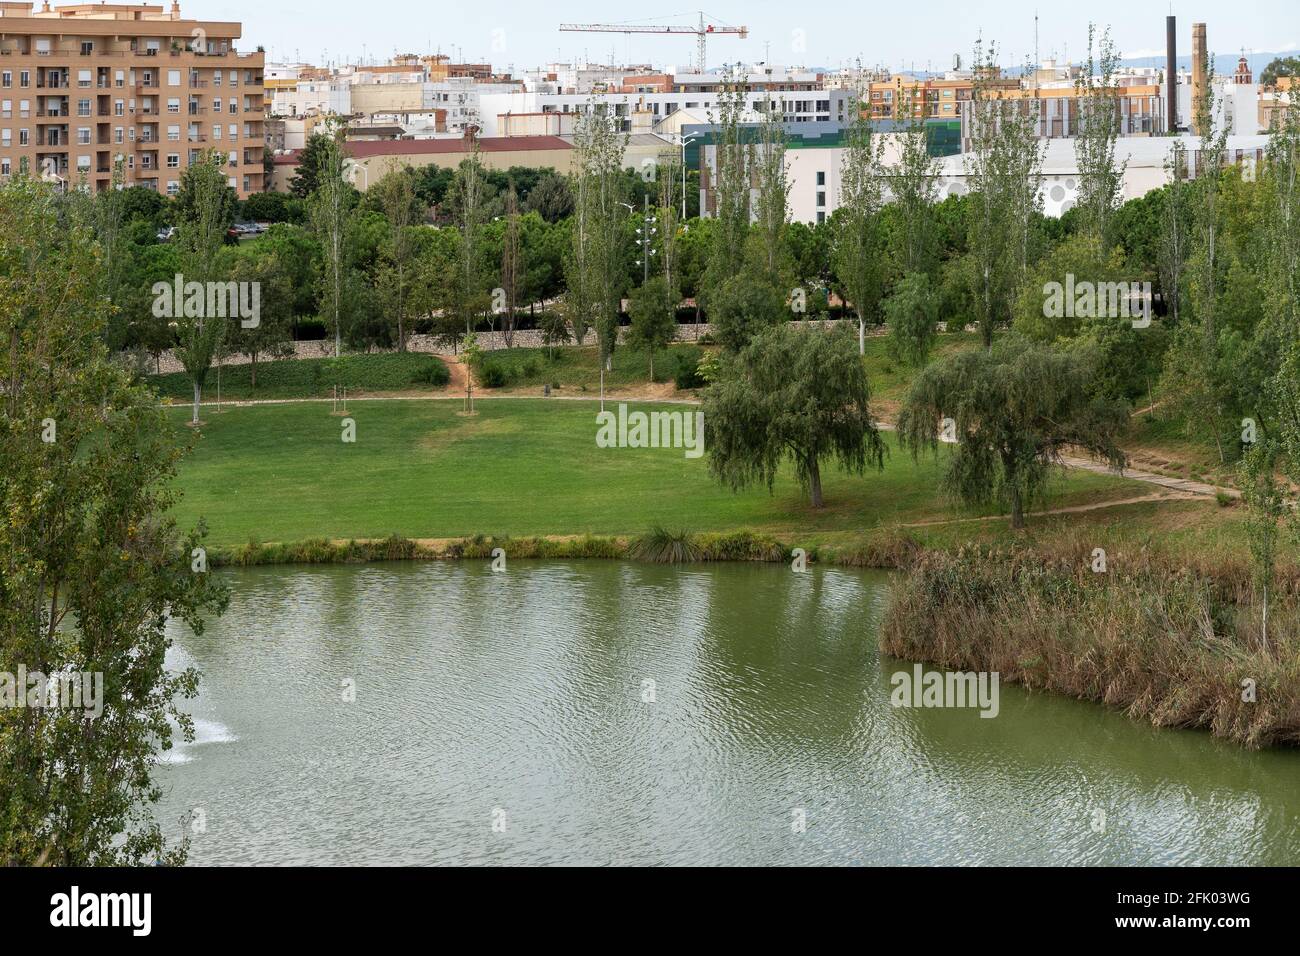 Beautiful green urban park. Public park with green grass fields, trees, waterways and pond. Parque de Cabecera, Valencia, Spain Stock Photo